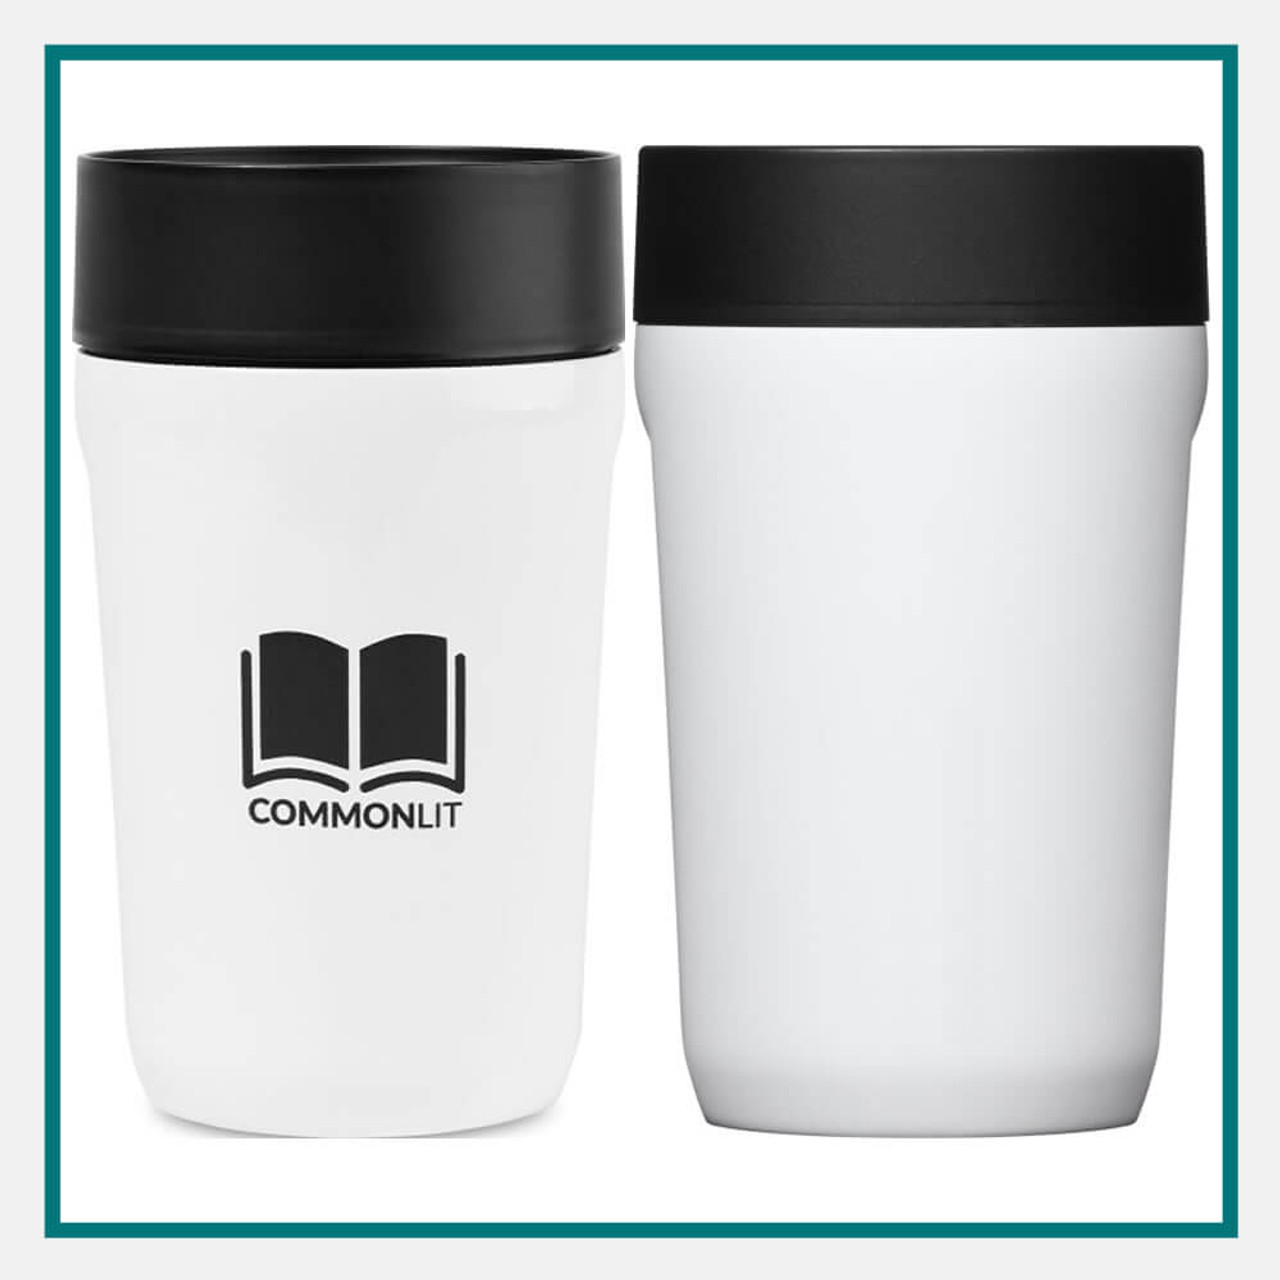 Promotional Corkcicle commuter cup - 9 oz. Personalized With Your